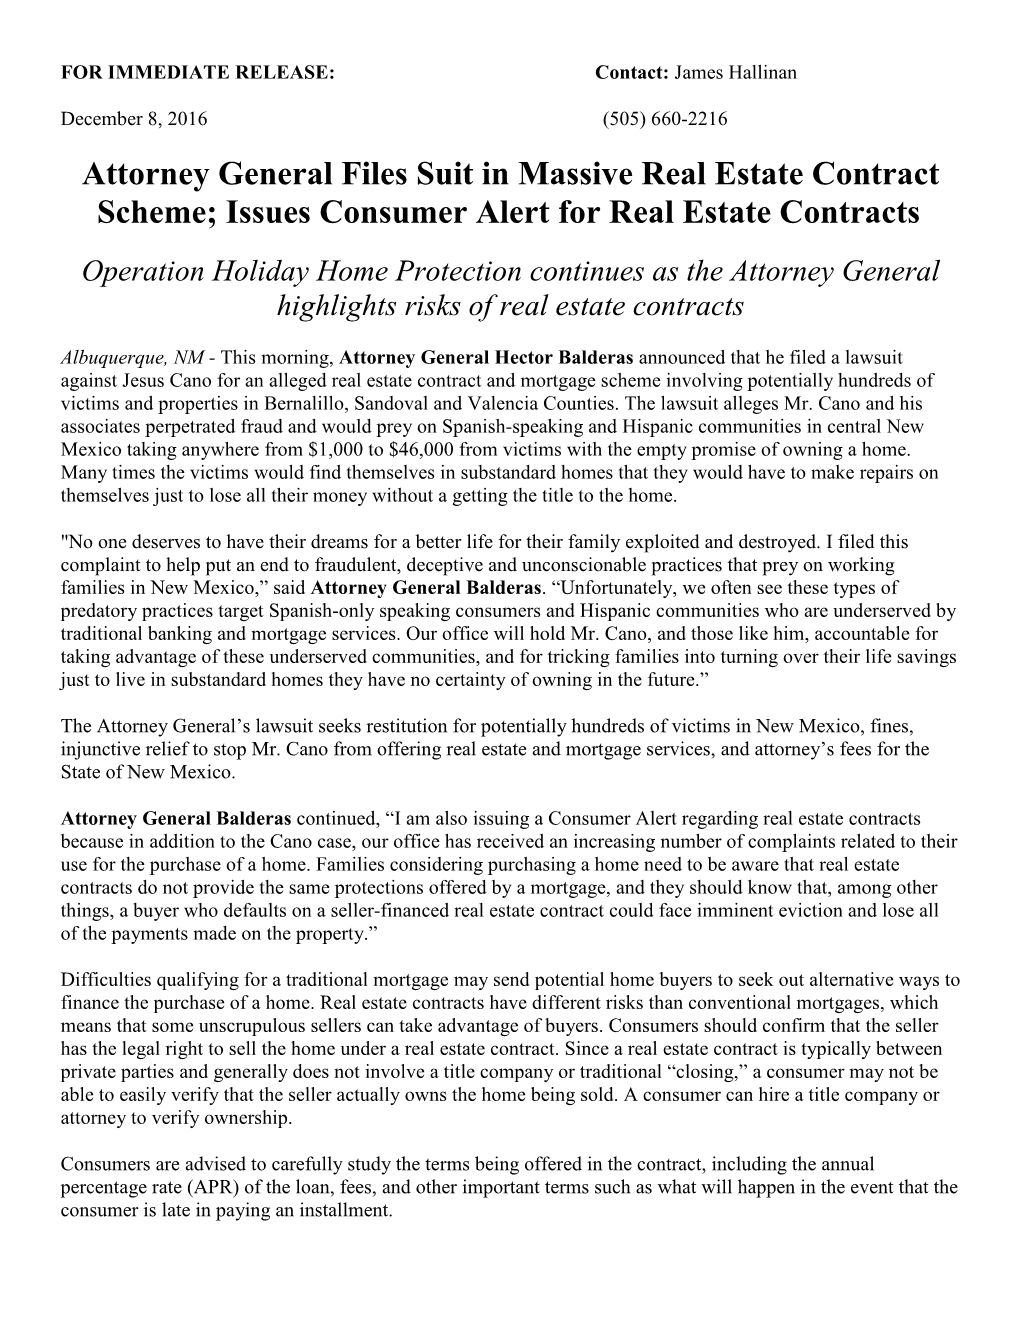 Issues Consumer Alert for Real Estate Contracts Operation Holiday Home Protection Continues As the Attorney General Highlights Risks of Real Estate Contracts